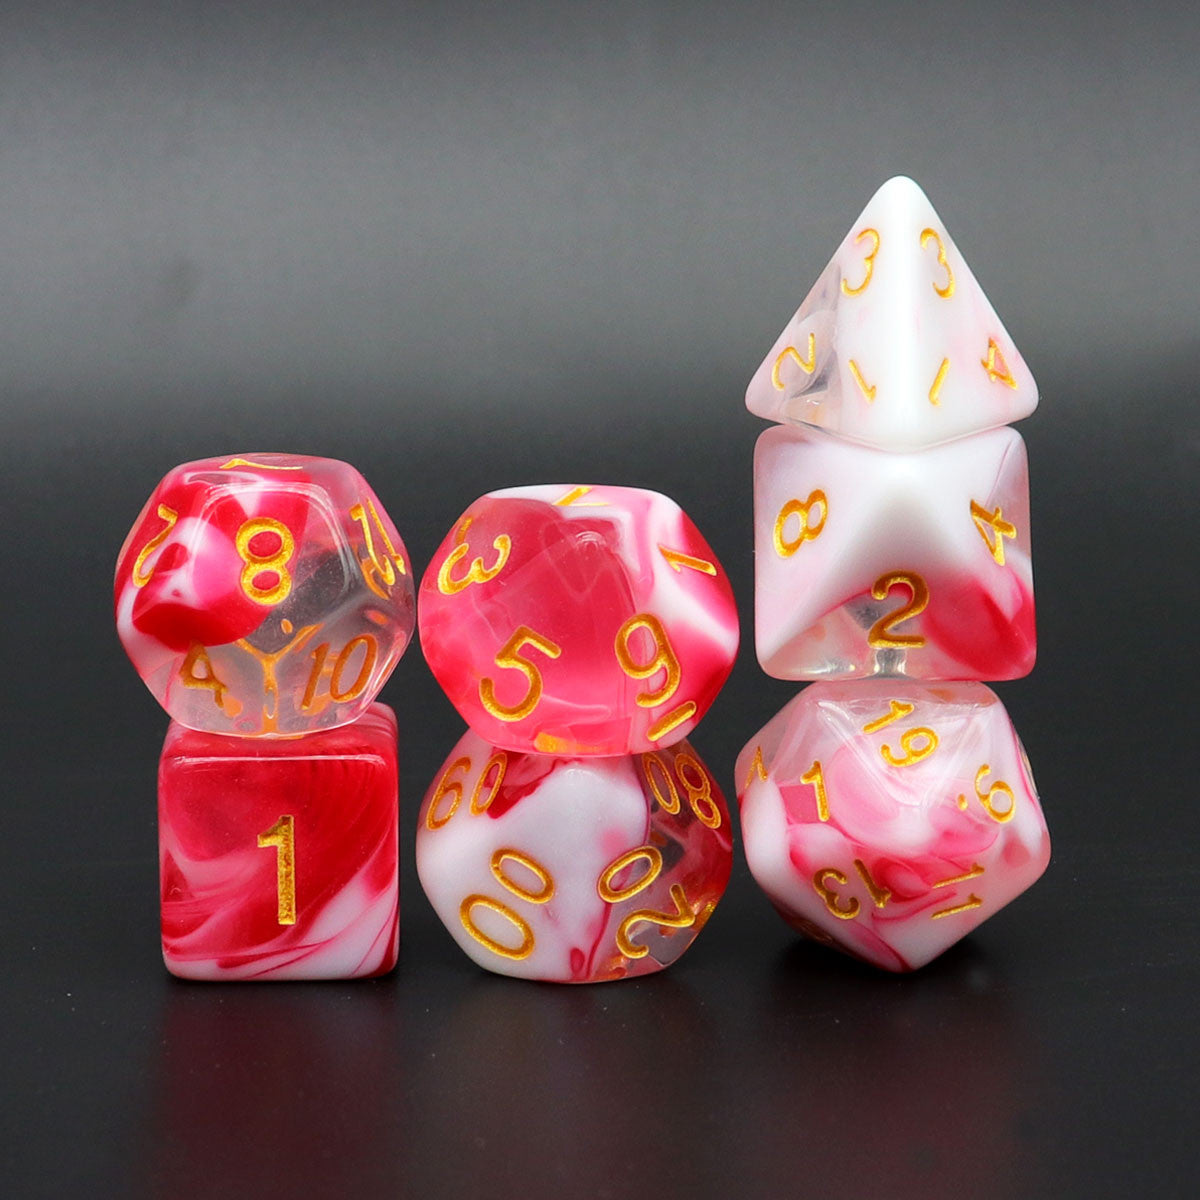 pink white dice, pink dice, white dice, clear dice, dnd dice rpg dice, polyhedral dice, dice set